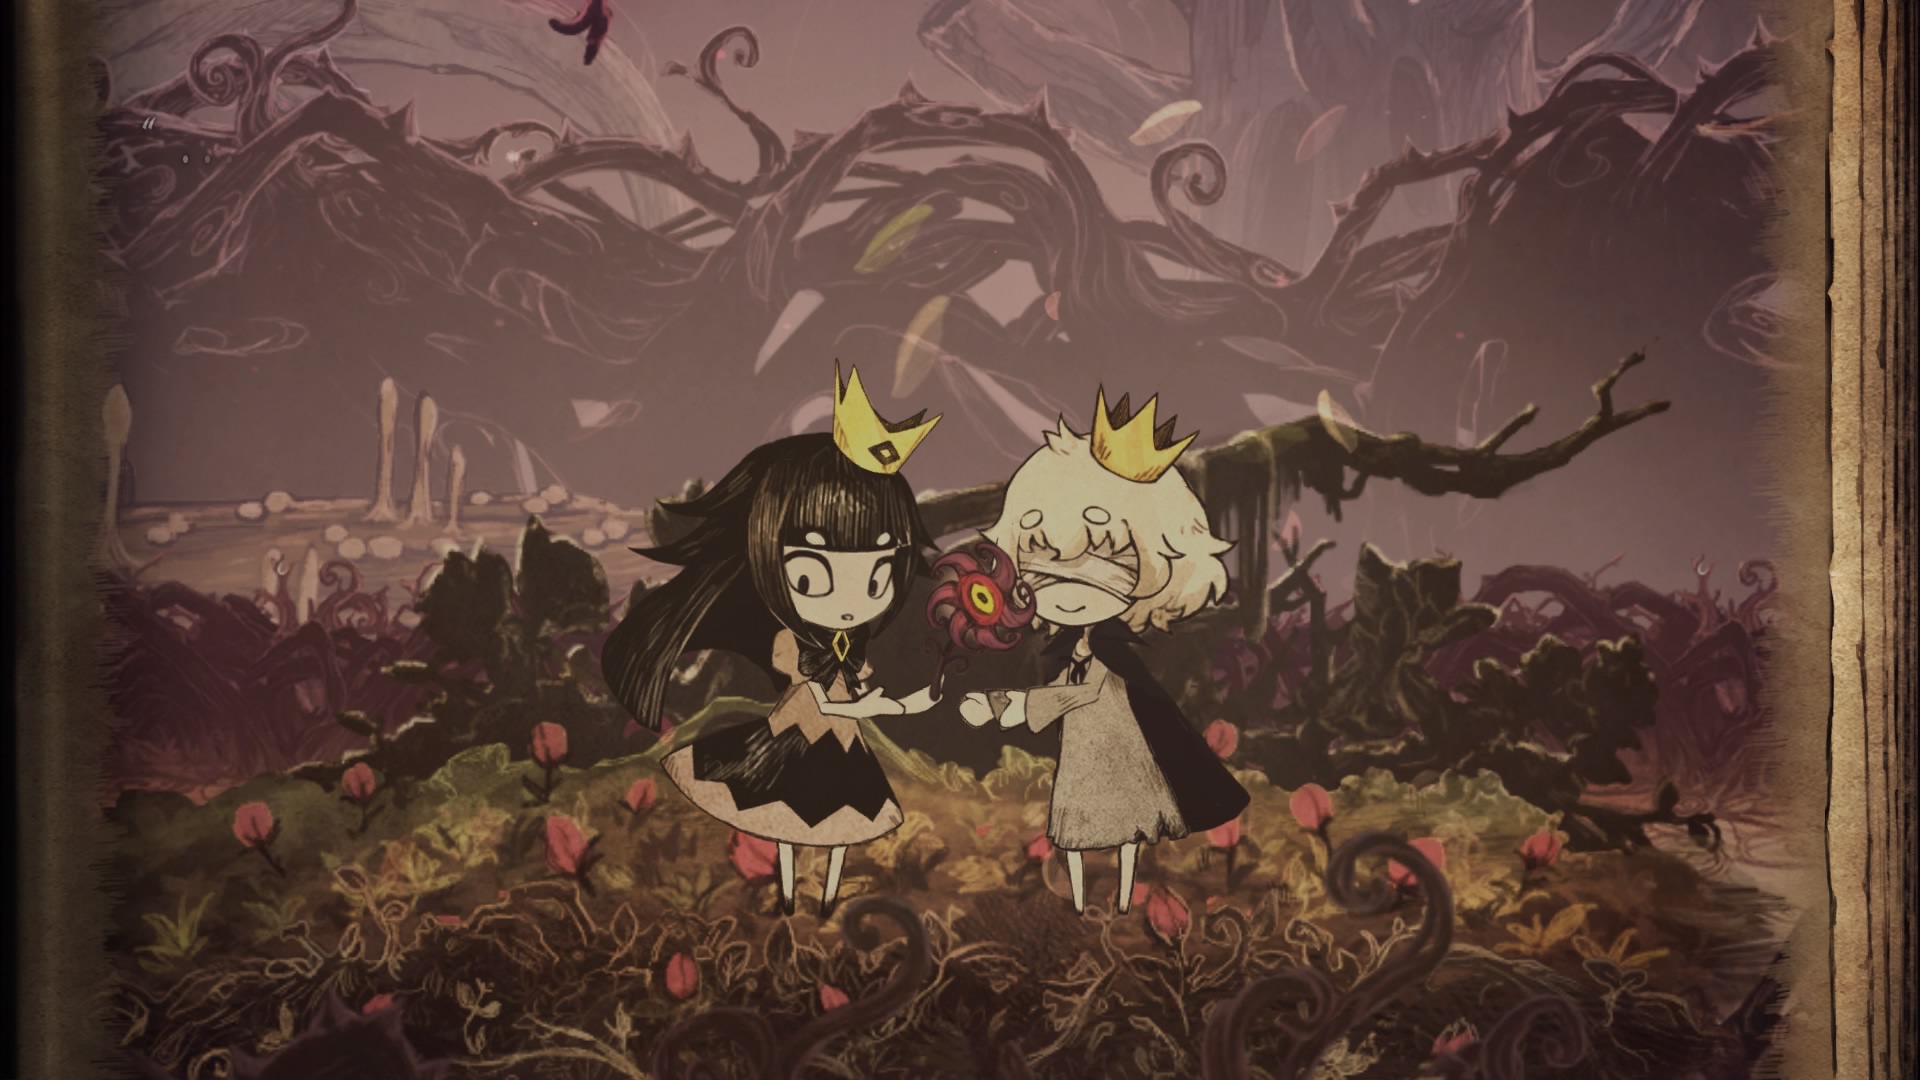 The Liar Princess and the Blind Prince review #11